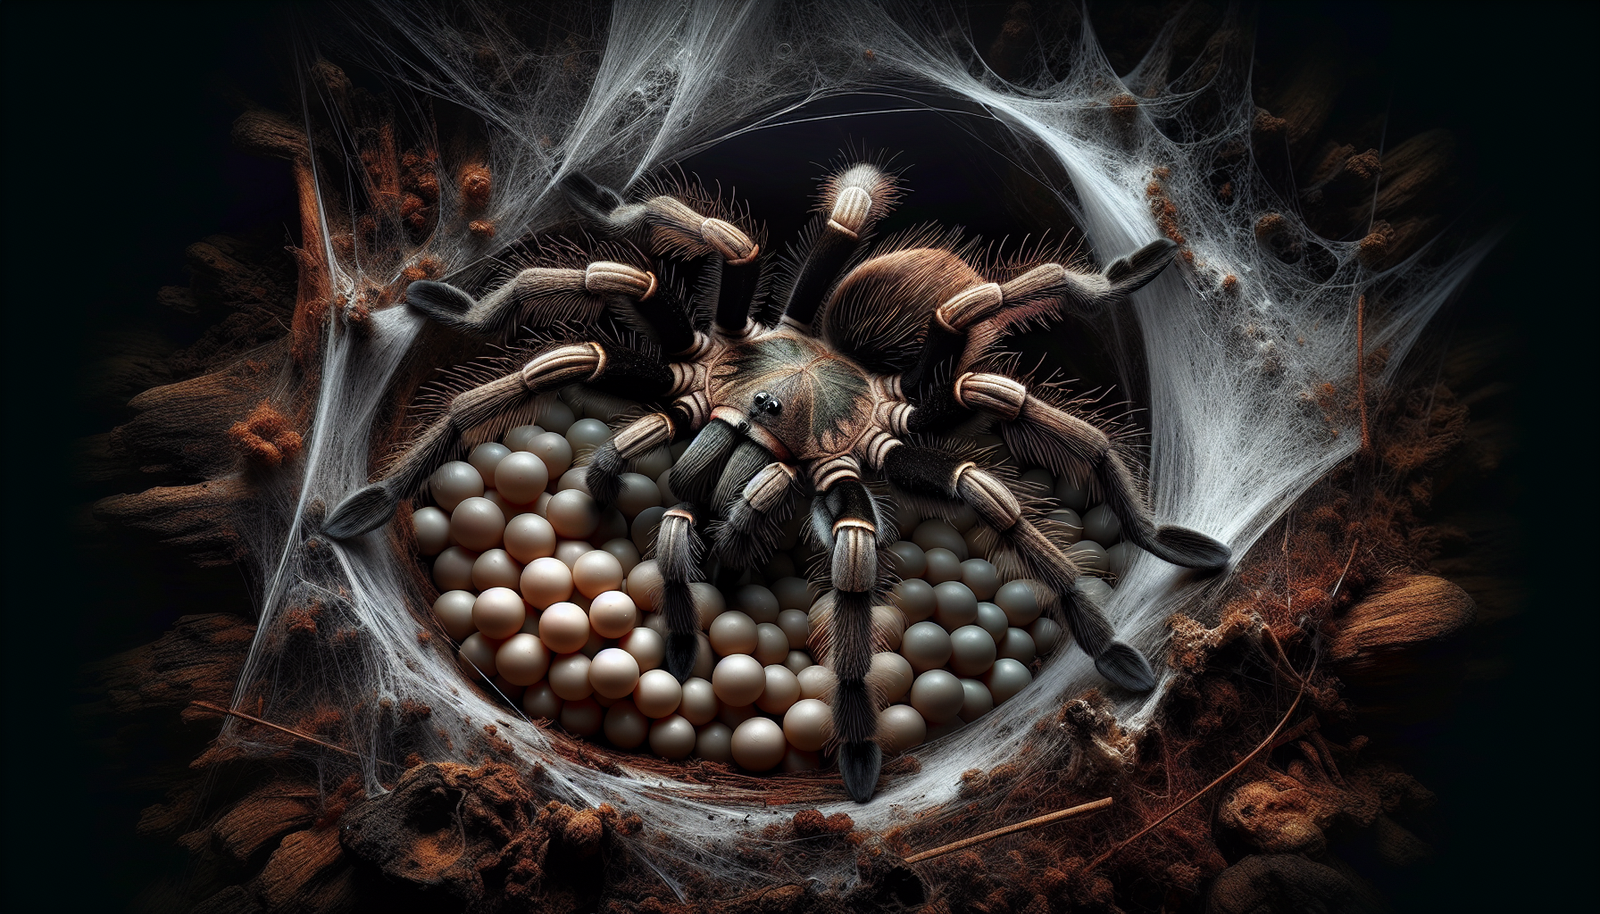 How Do Tarantulas Protect Their Eggs And Spiderlings From Potential Threats?